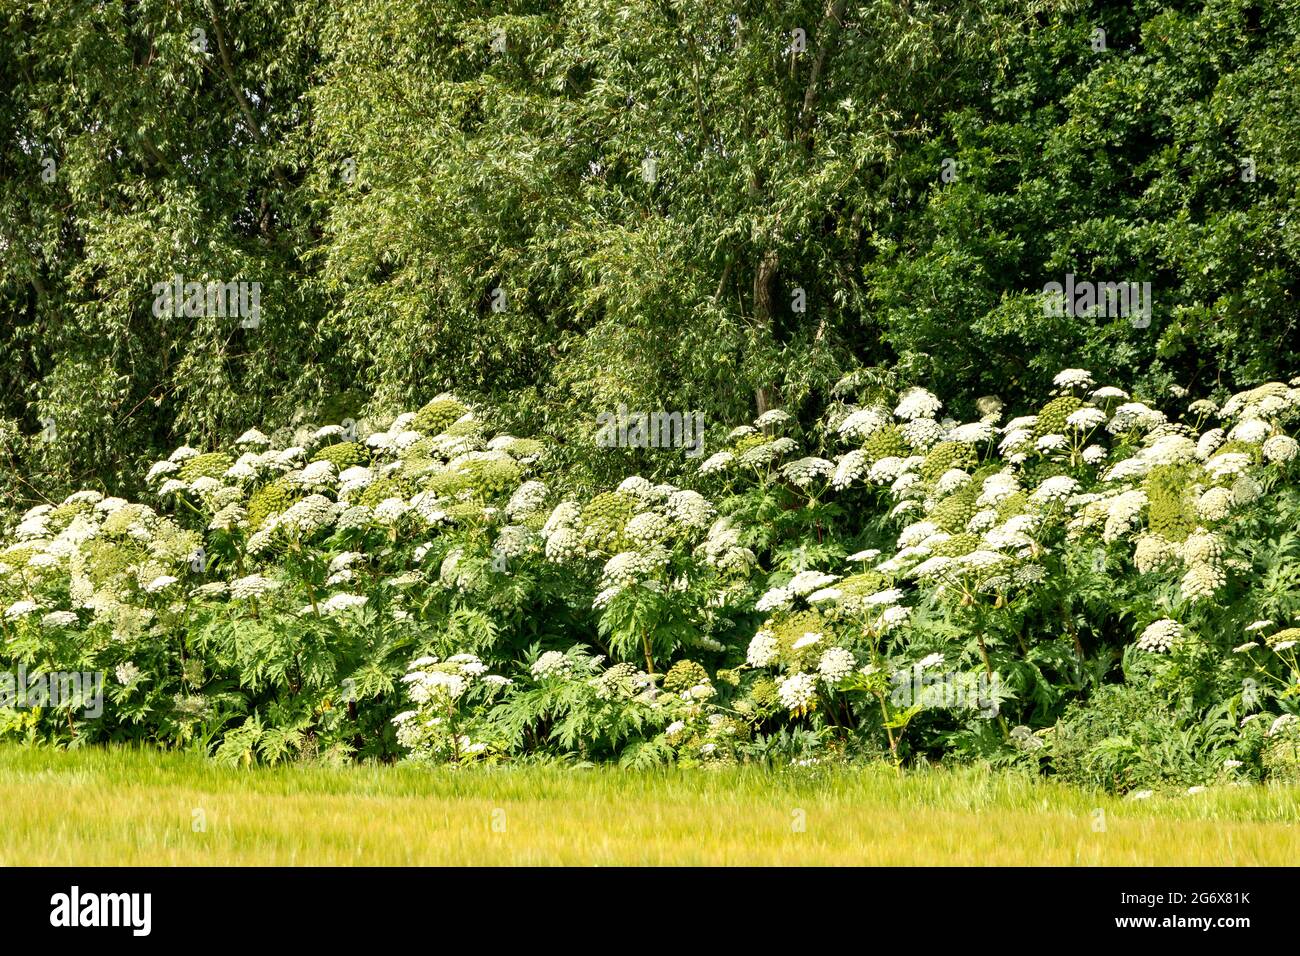 GIANT HOGWEED PLANTS Heracleum mantegazzianum IN SUMMER GROWING ALONG A WATERCOURSE NEAR A FIELD OF BARLEY Stock Photo